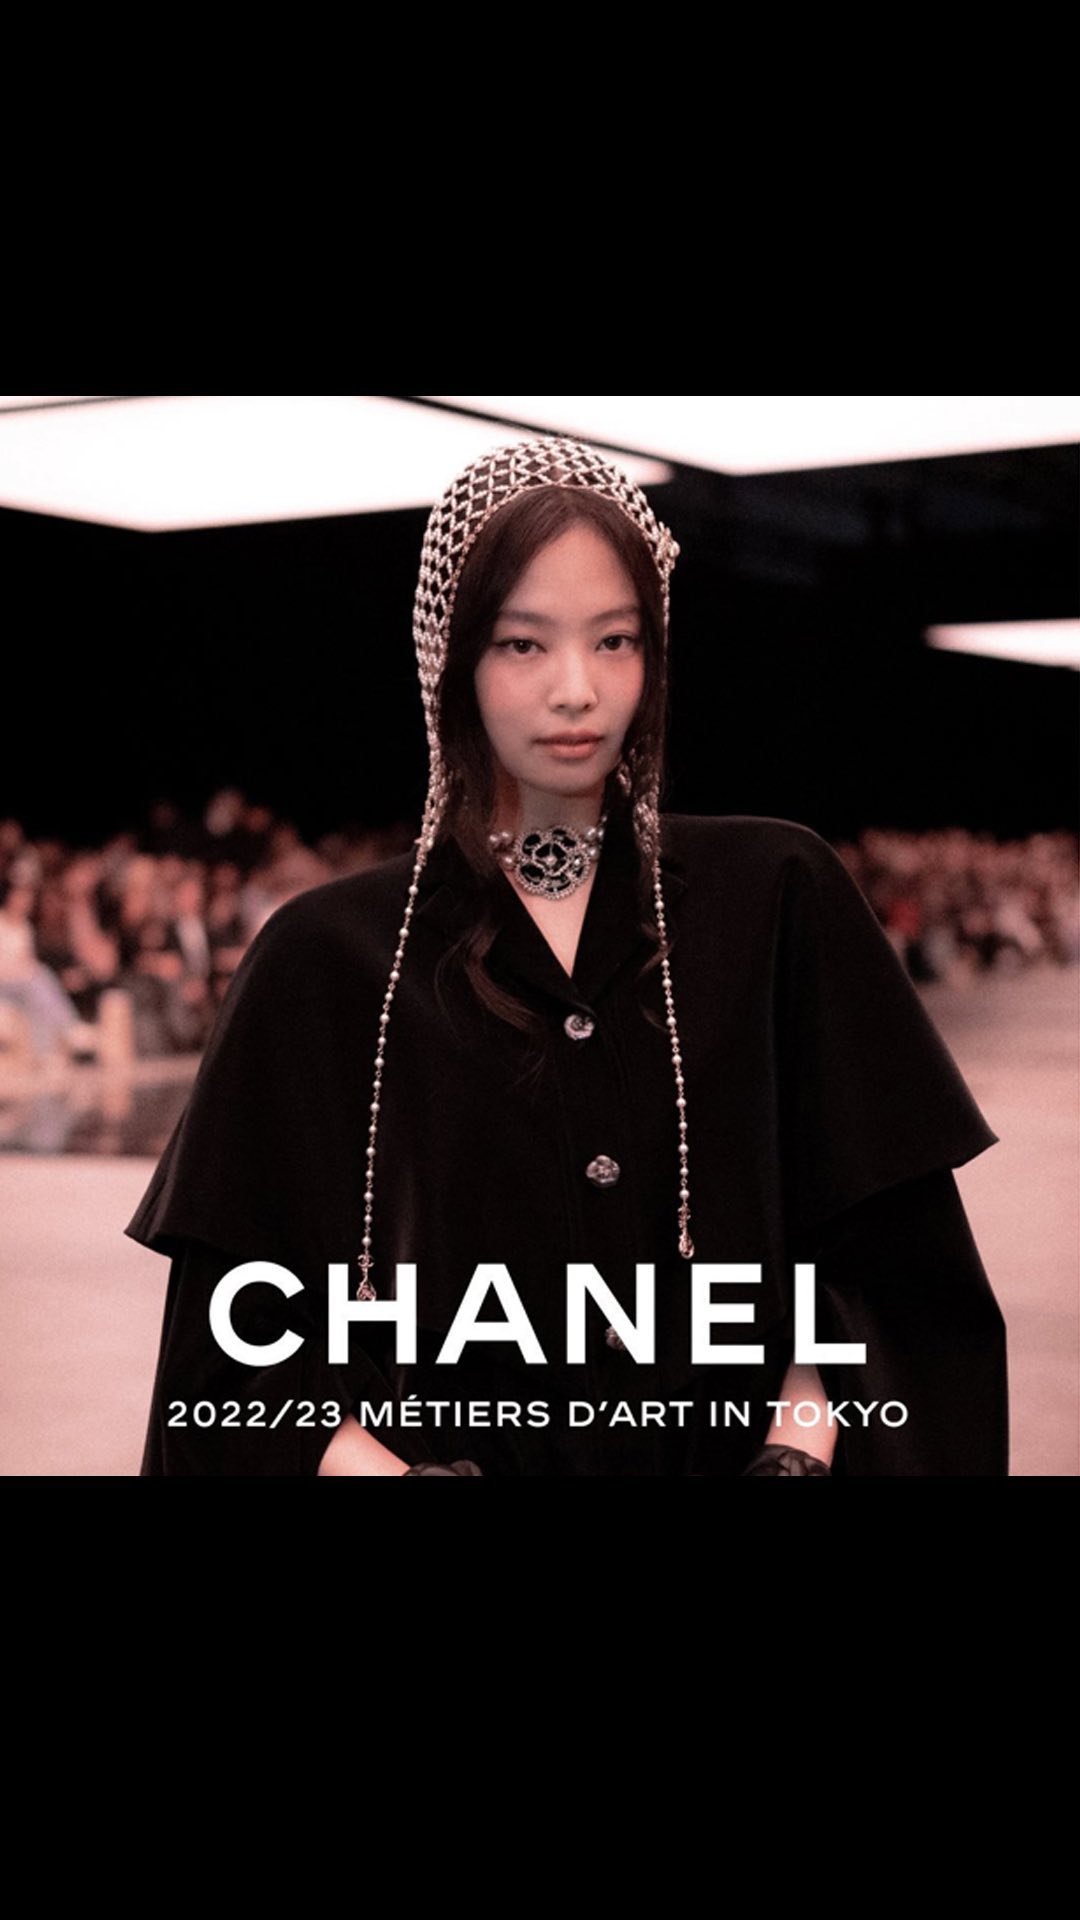 CHANEL 2022/23 
Métiers d’art replica show in Tokyo
⁣⁣⁣
We are honored to be the service company behind the grandeur of CHANEL's latest show in Tokyo 

Production Company: Walter Films
Director: Caroline de Maigret, Philippe Prouff
Producer : Simon Arias, Asako Furukata
Service Company: AOI Pro.